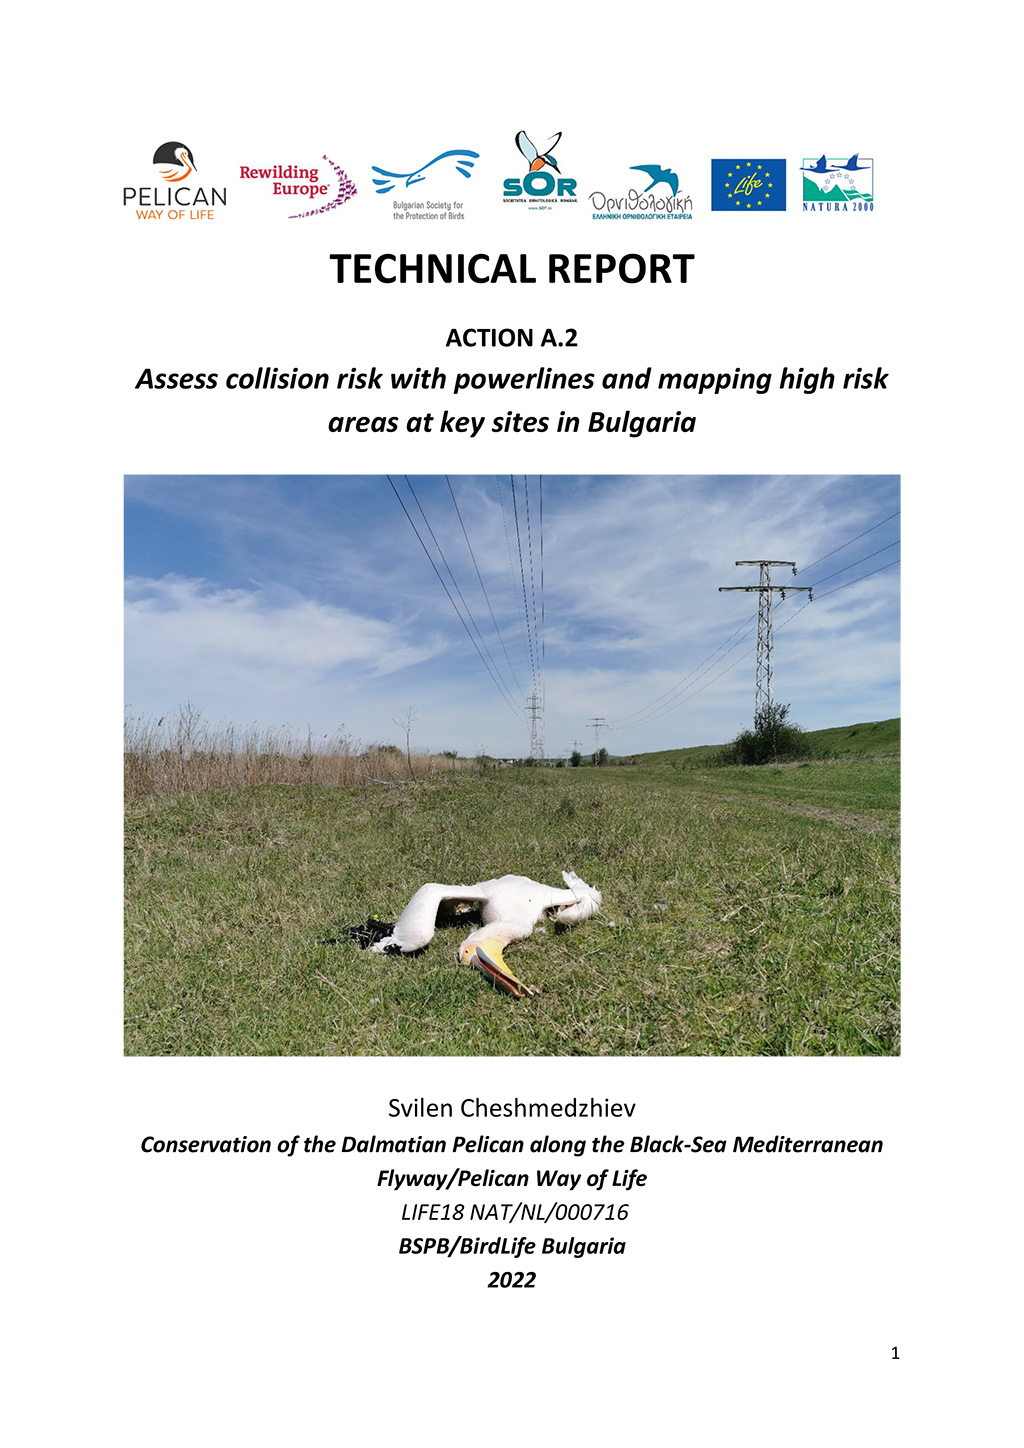 Assess collision risk with powerlines and mapping high risk areas at key sites in Bulgaria